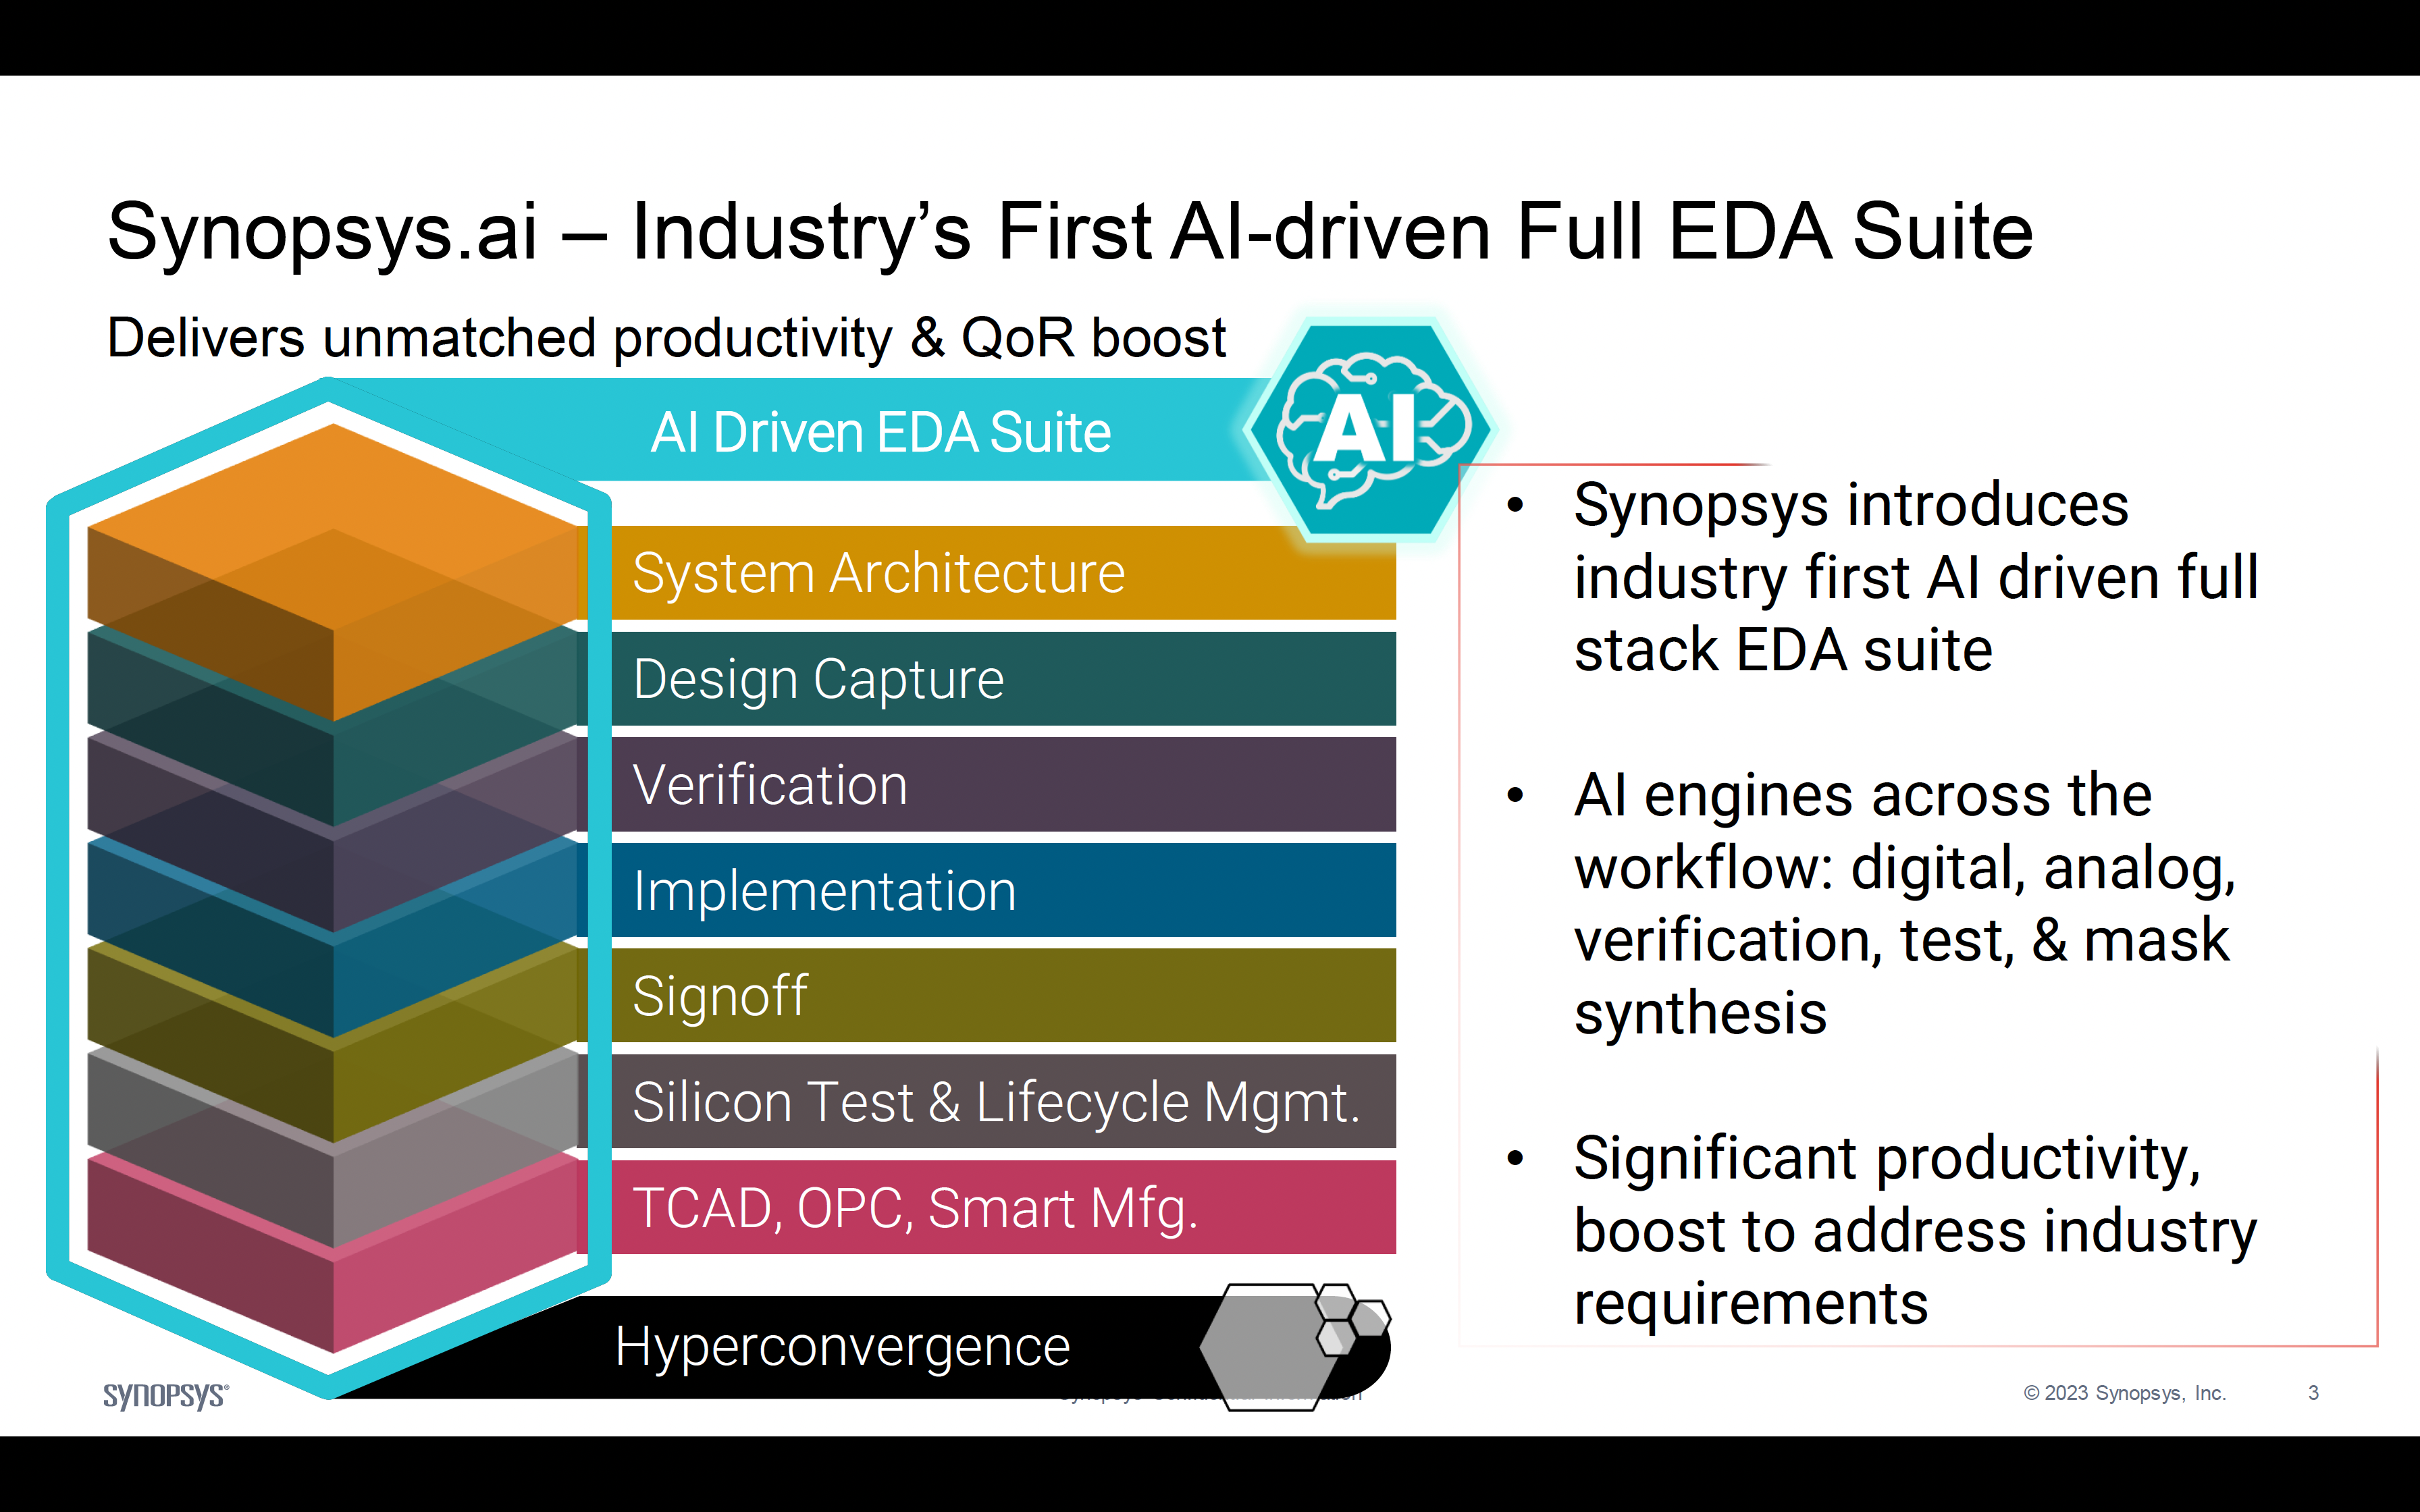 Synopsys.ai Industry First AI driven Full EDA Suite